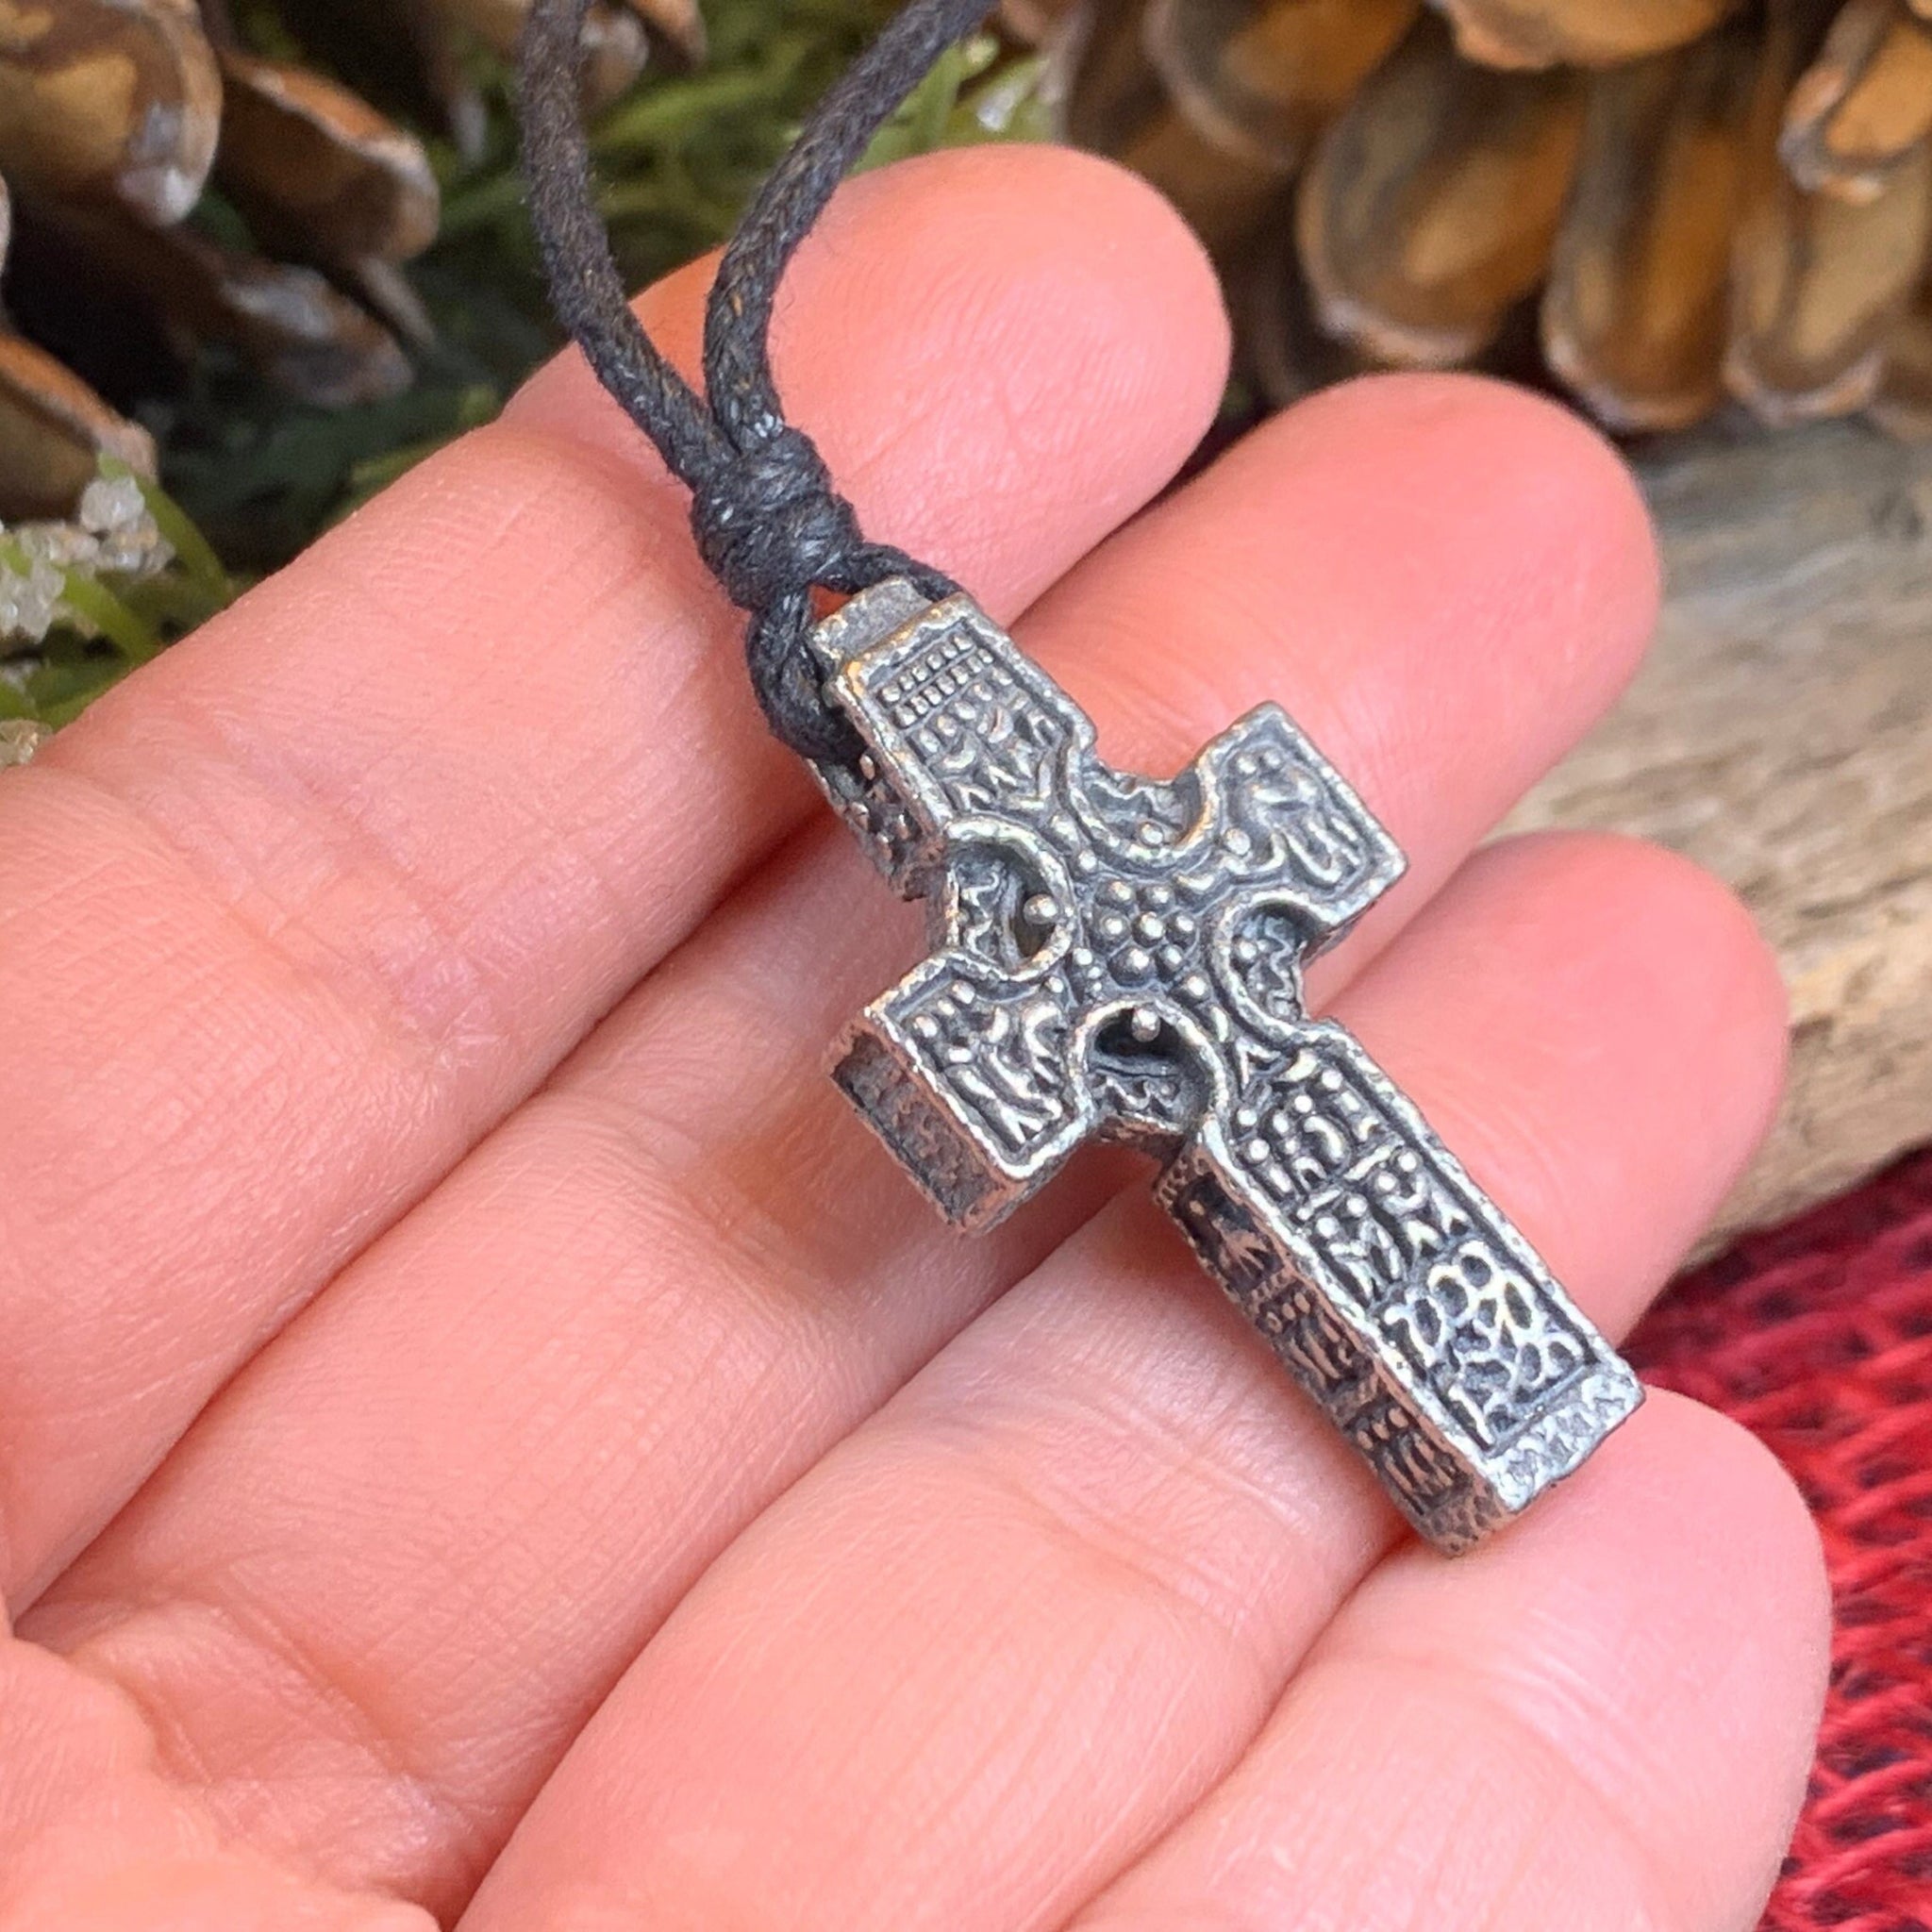 Ahenny Celtic High Cross Necklace – Celtic Crystal Design Jewelry